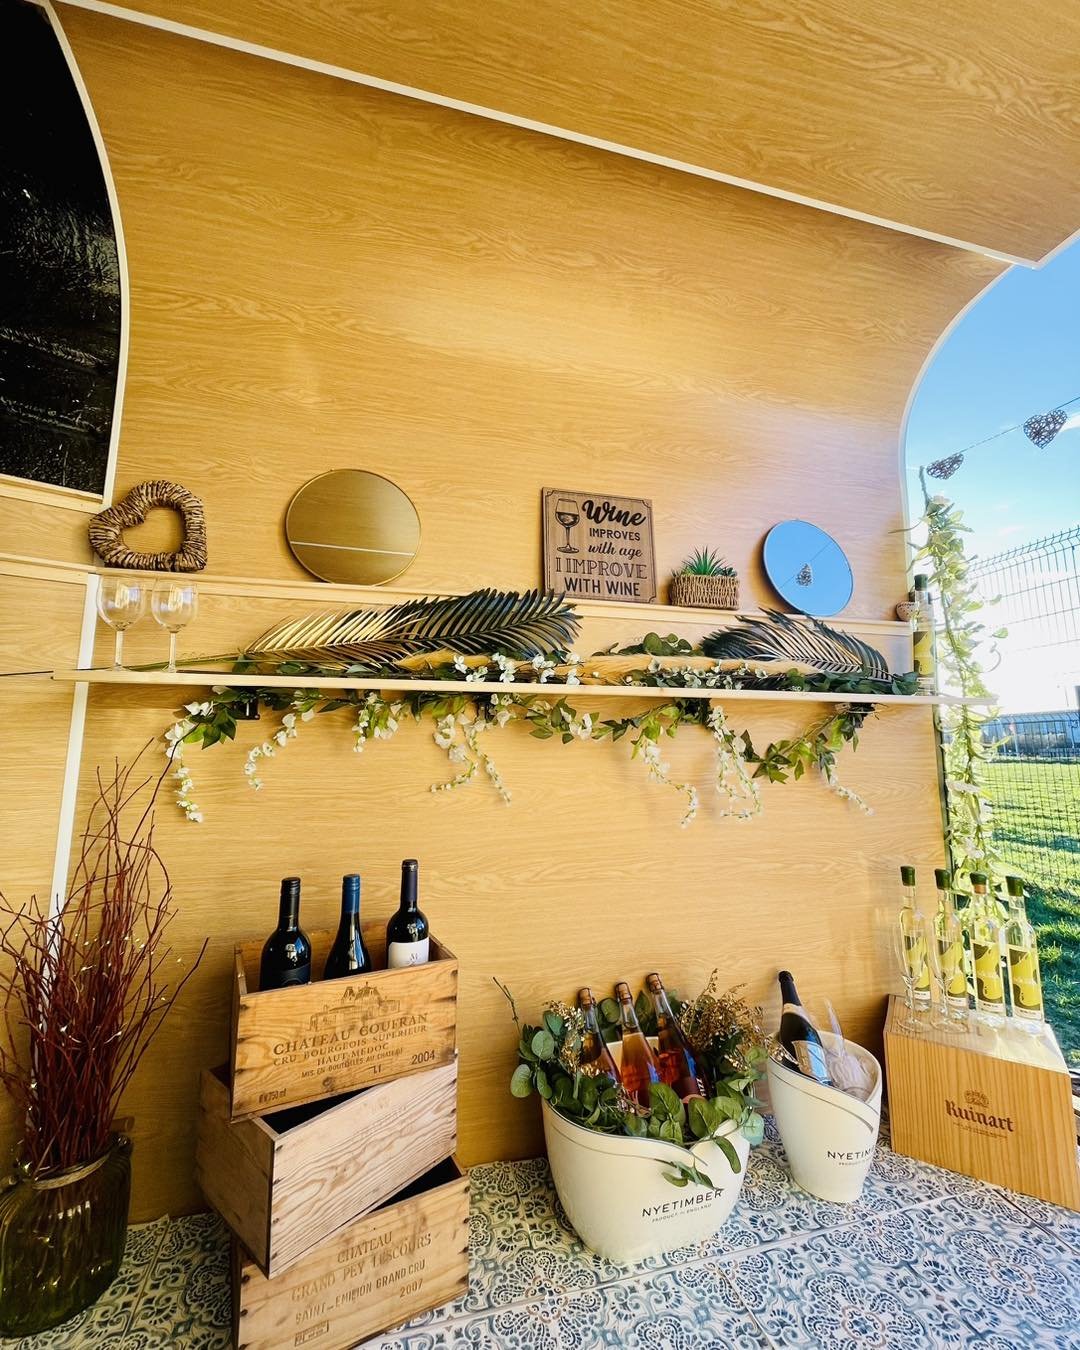 🥂5 reasons to hire our mobile, renovated, vintage horsebox bar:

1. Flexible - we create bespoke drinks packages tailored to suit your needs

2. Support Local - award-winning independent business with a personal touch &amp; we collaborate with other